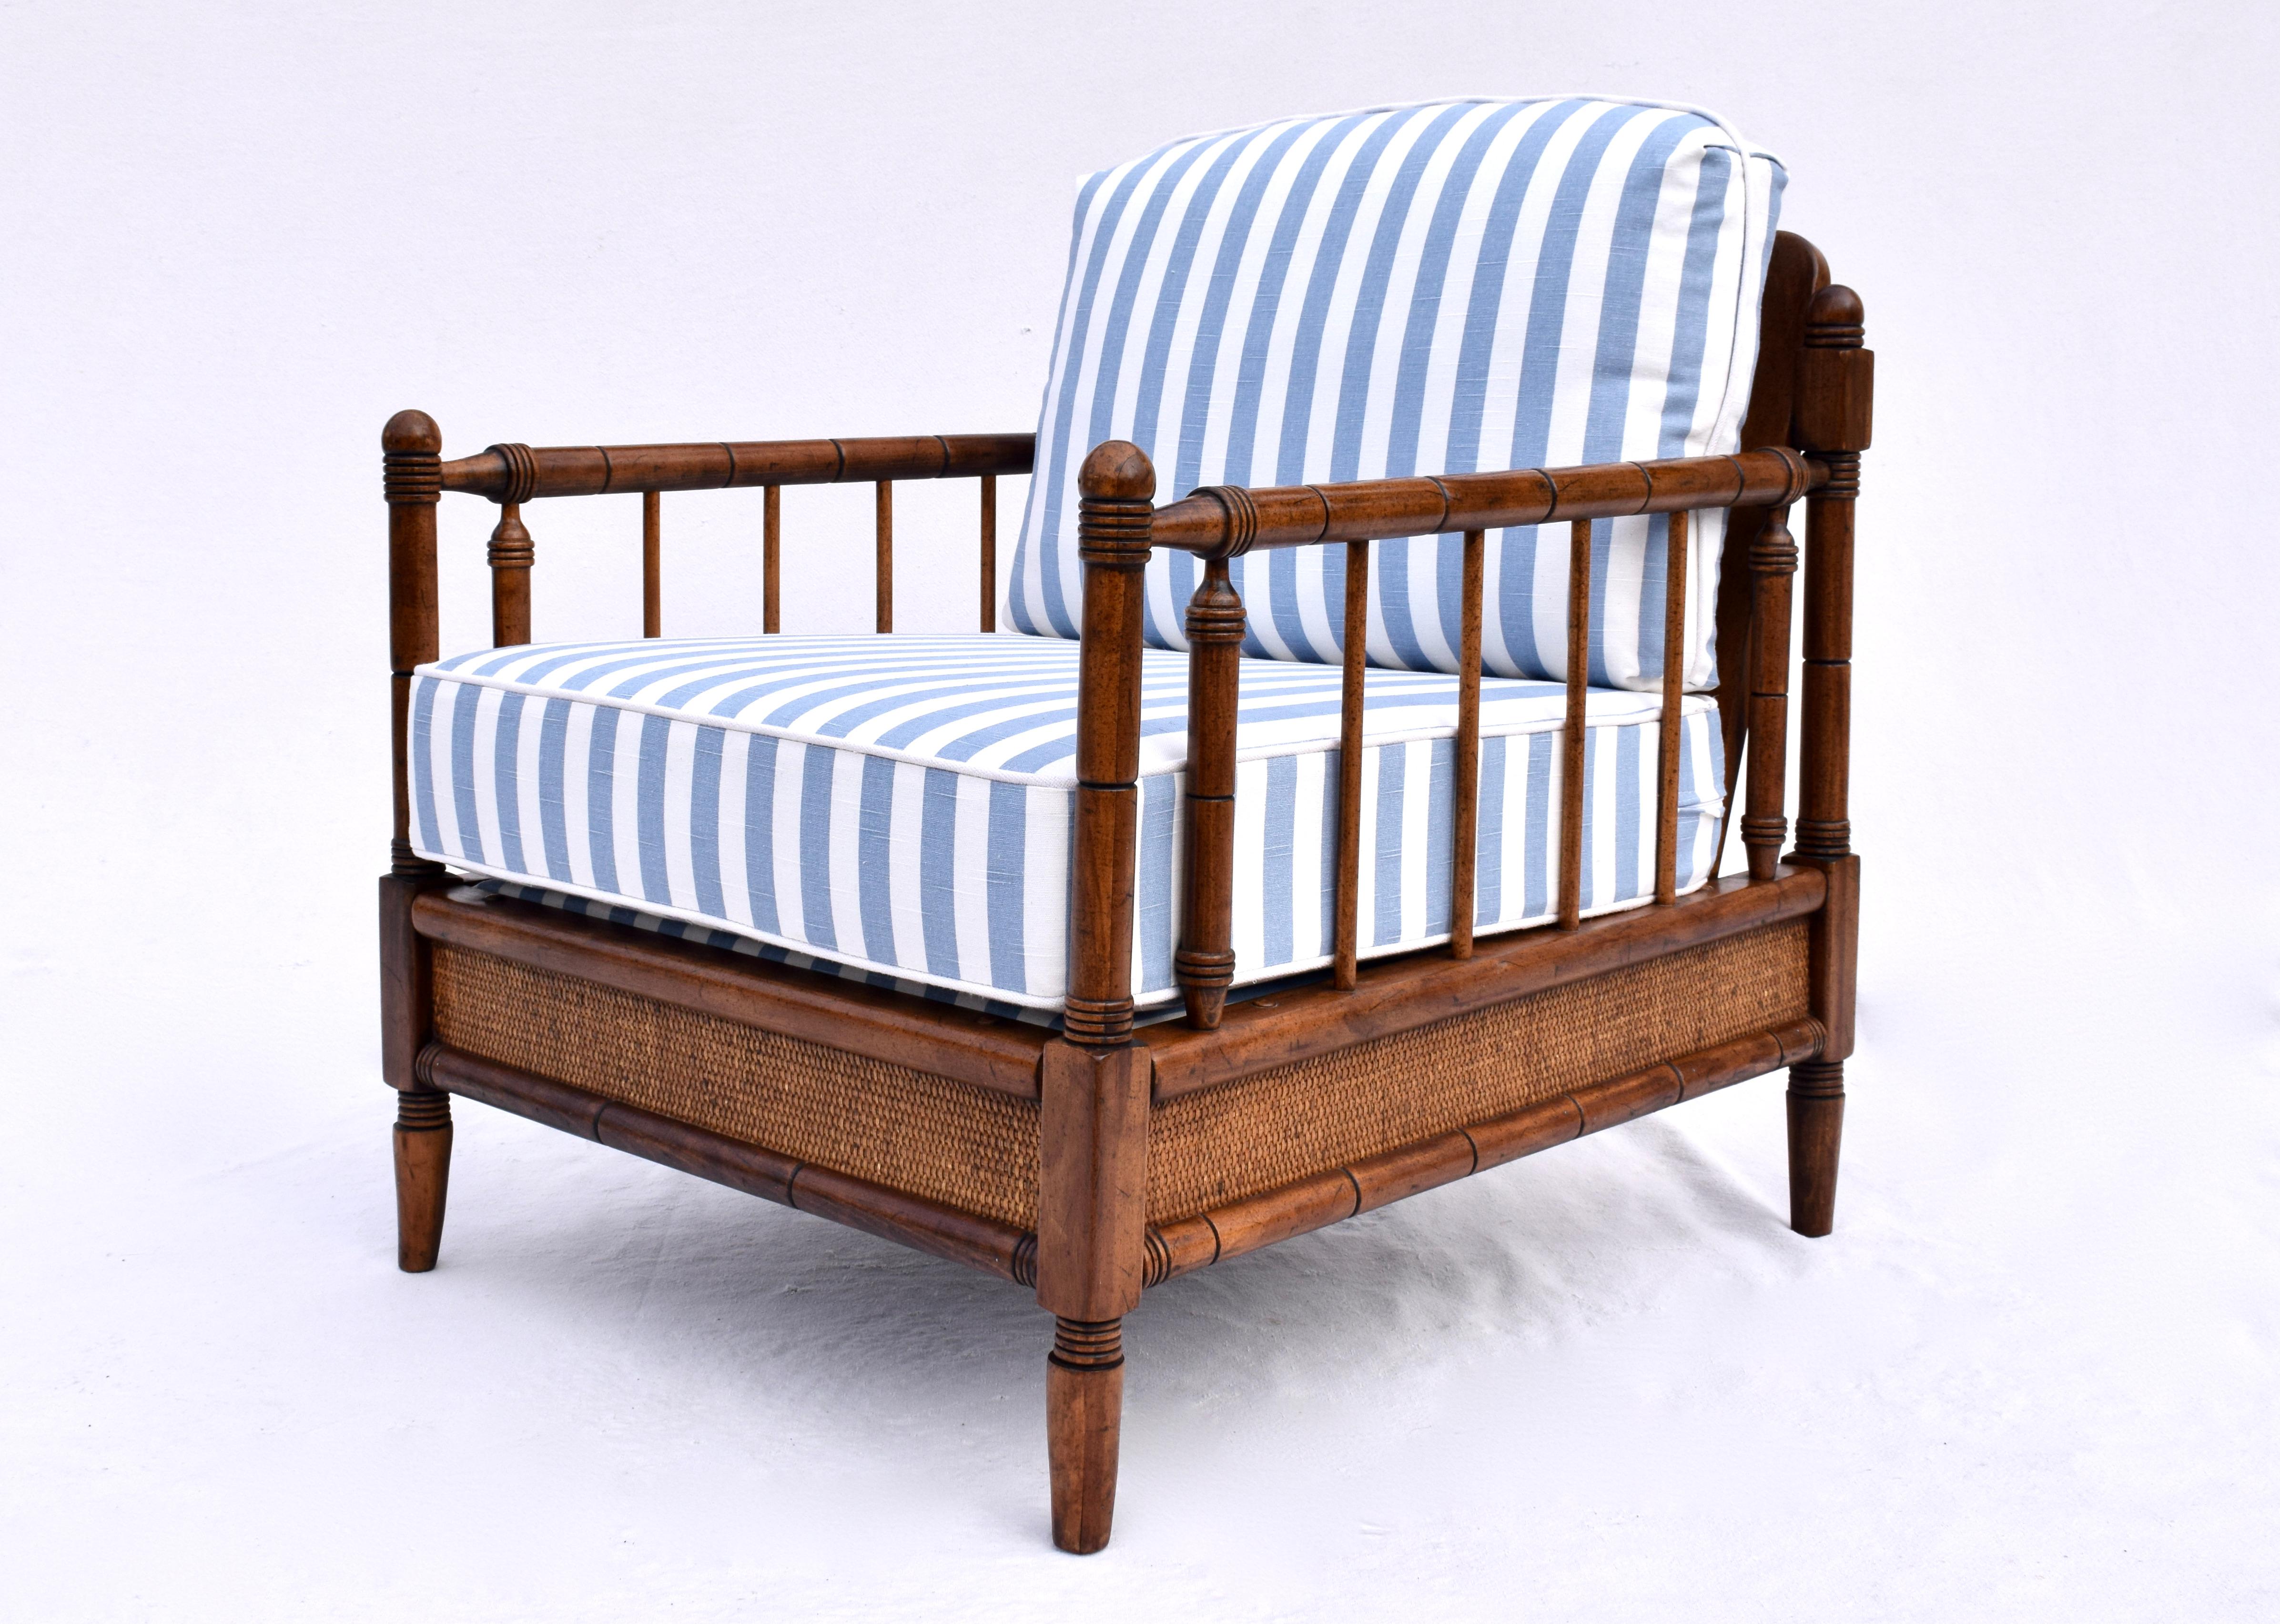 1950's Broyhill Premier Chair & ottoman set with new custom cushions & upholstery. Solid wood construction and grasscloth surround, hand rubbed original finish with warm patina. Timeless design elements are especially suitable for casual & coastal